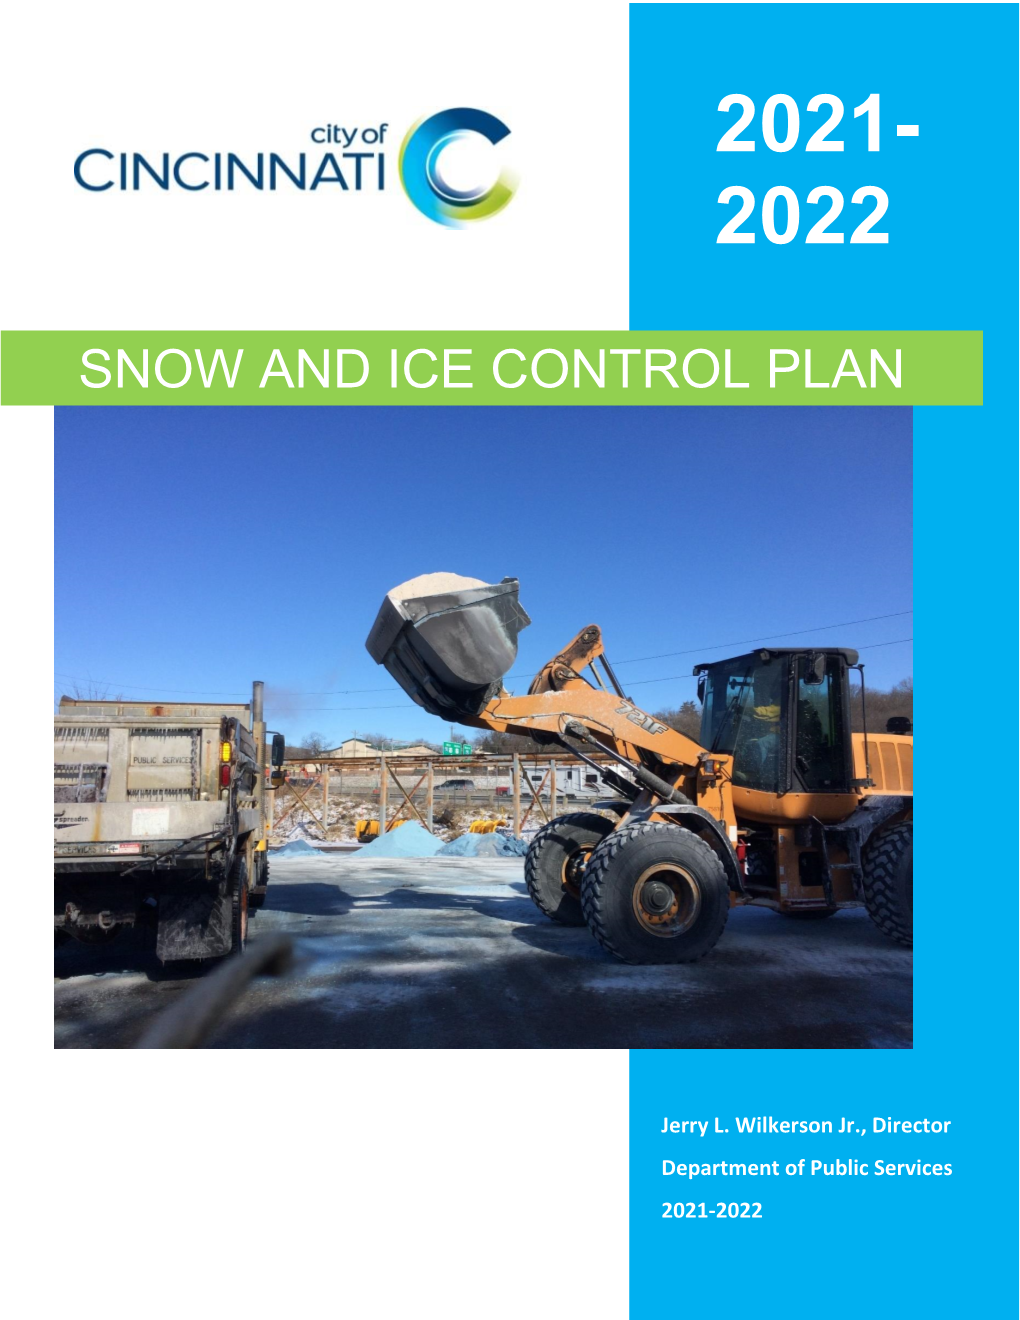 Snow Removal and Ice Control Plan